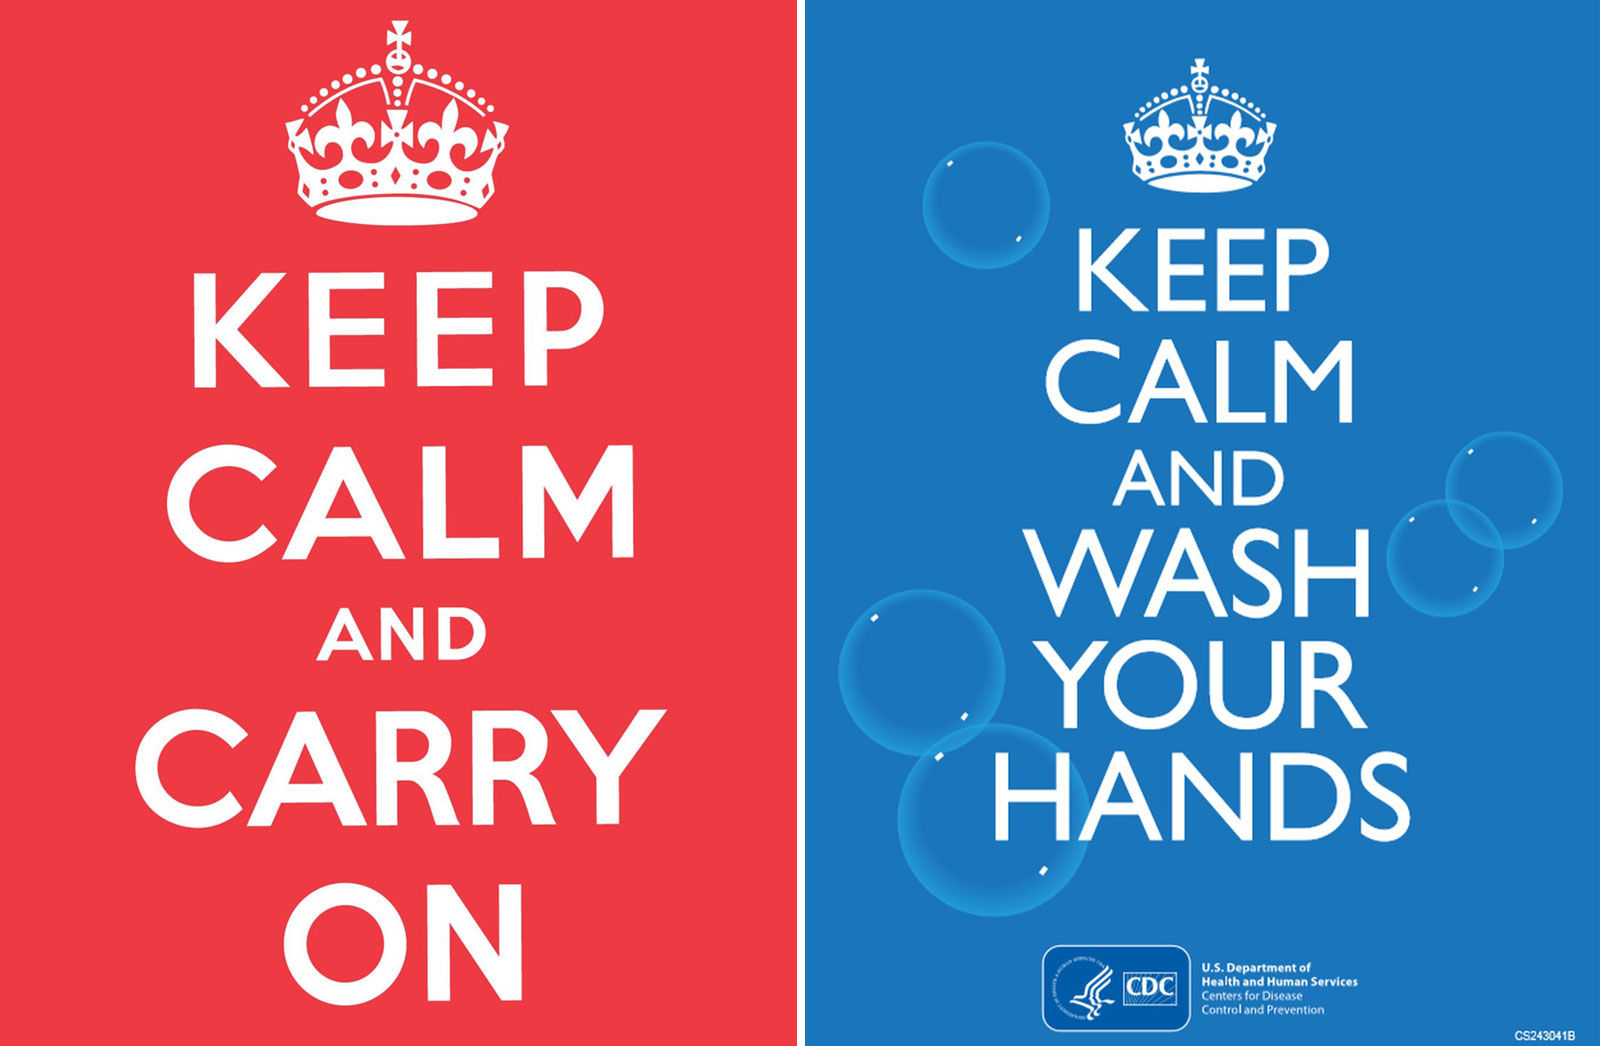 Keep Calm and Carry On poster and a modern reimagining